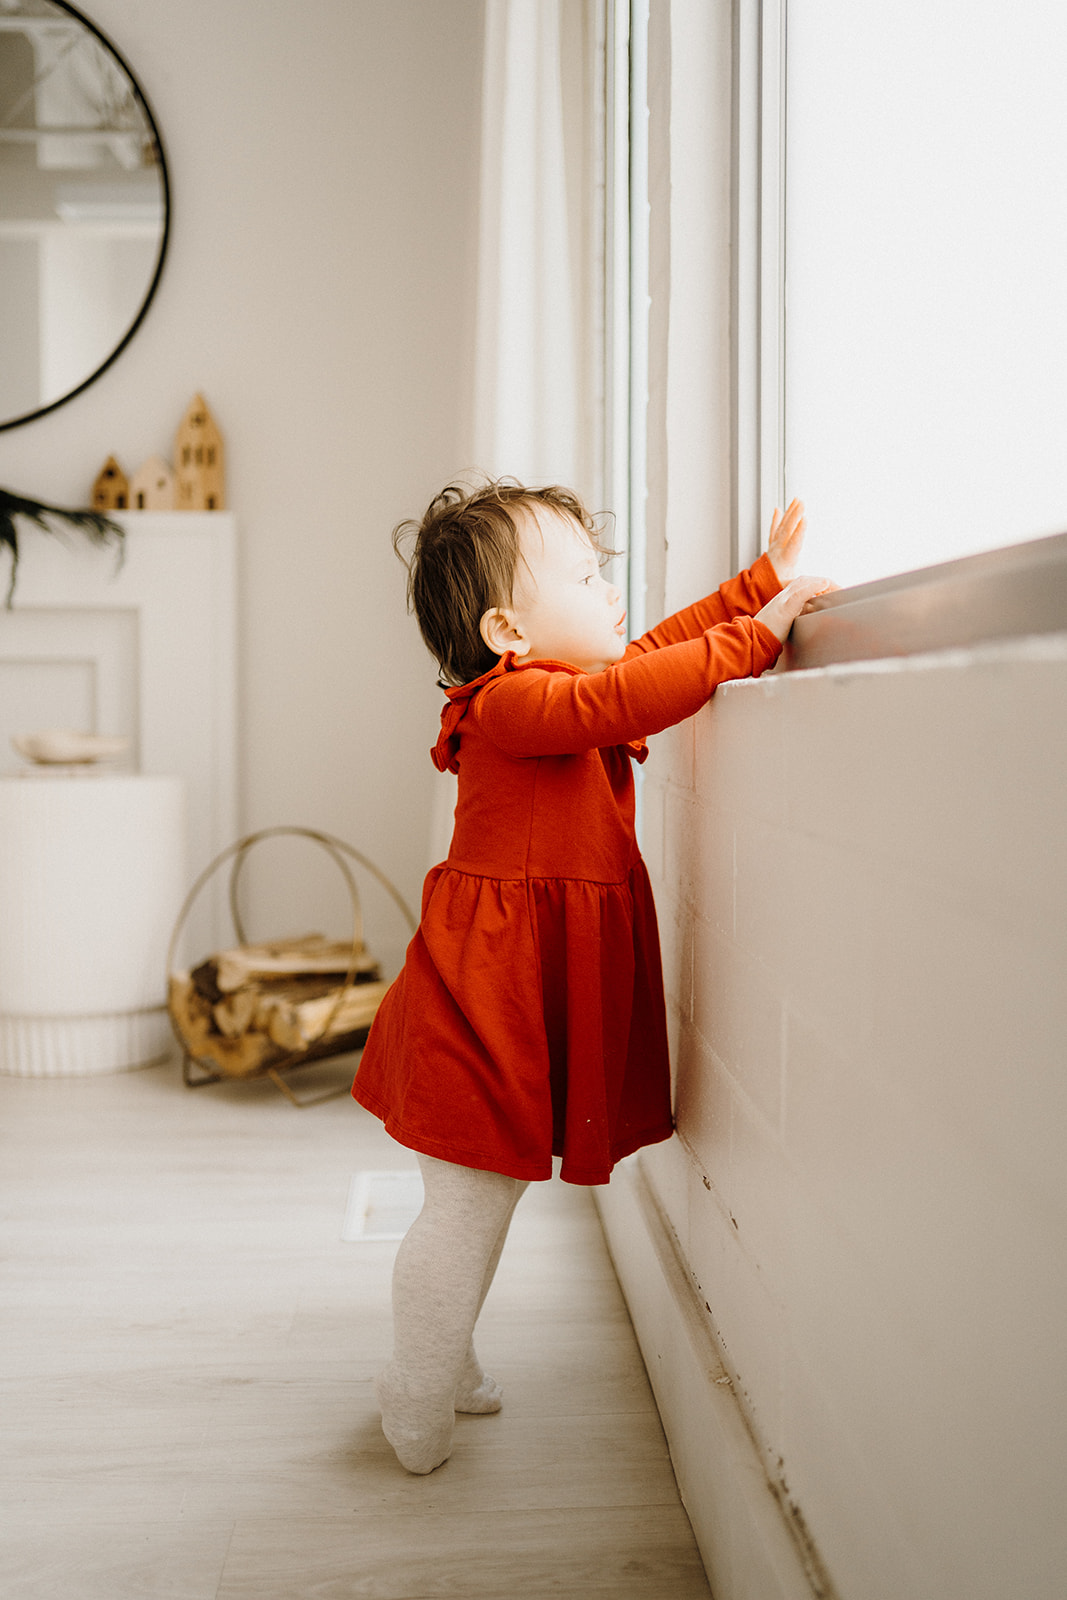 A toddler standing, touching the window.